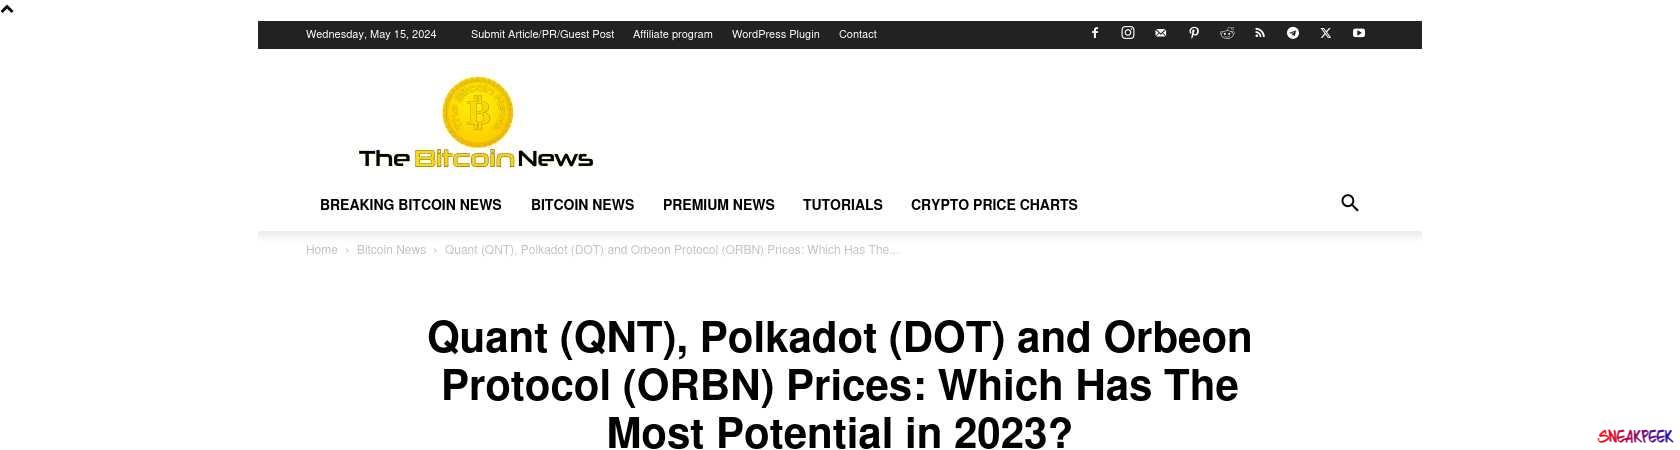 Read the full Article:  ⭲ Quant (QNT), Polkadot (DOT) and Orbeon Protocol (ORBN) Prices: Which Has The Most Potential in 2023?